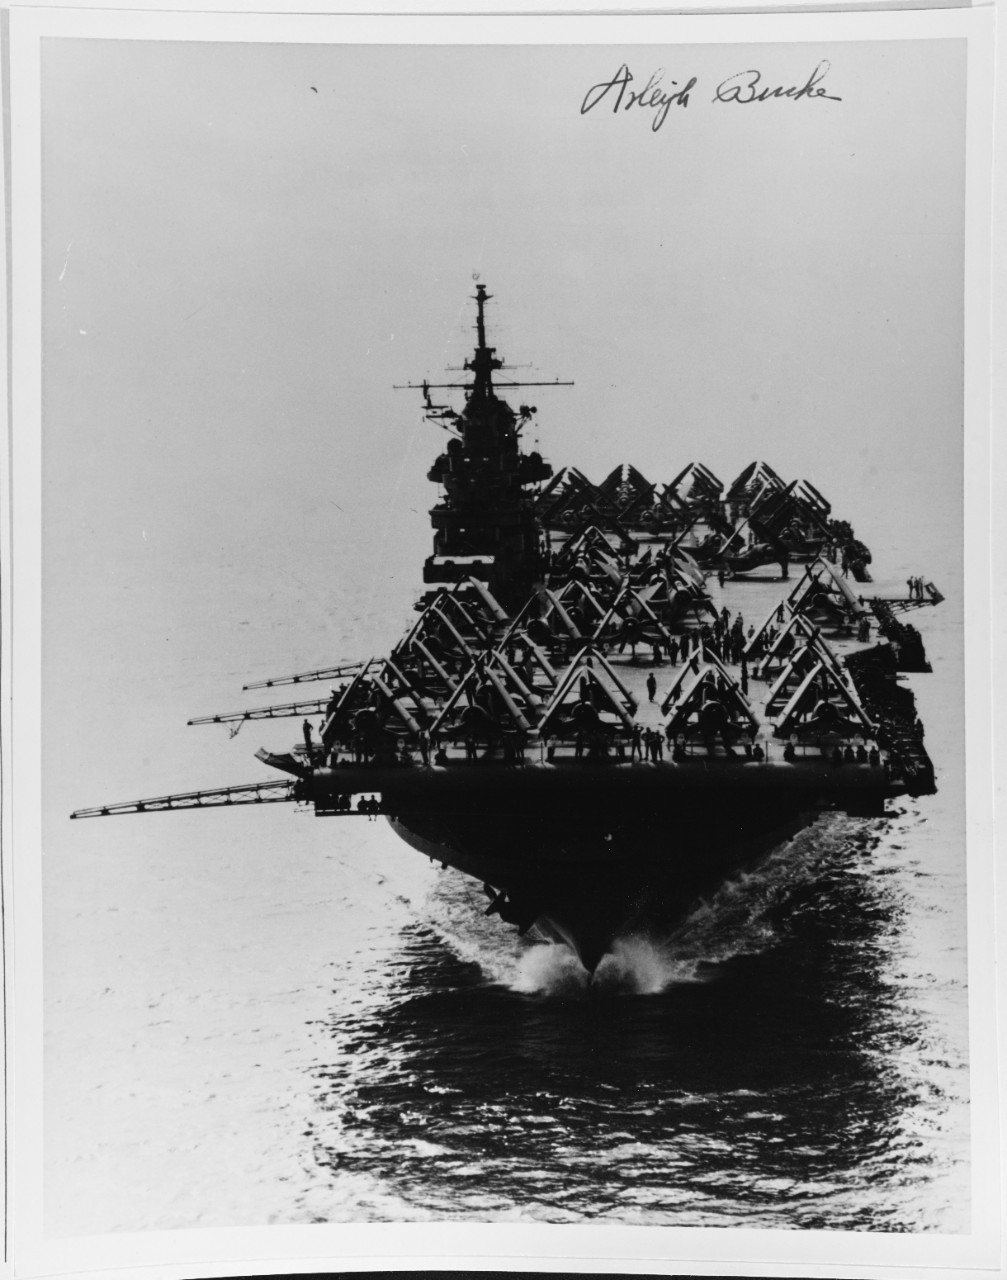 USS BUNKER HILL (CV-17) Admiral A. Burke was assigned to First Carrier Task Force Pacific, from March 1944 -- May 1945.